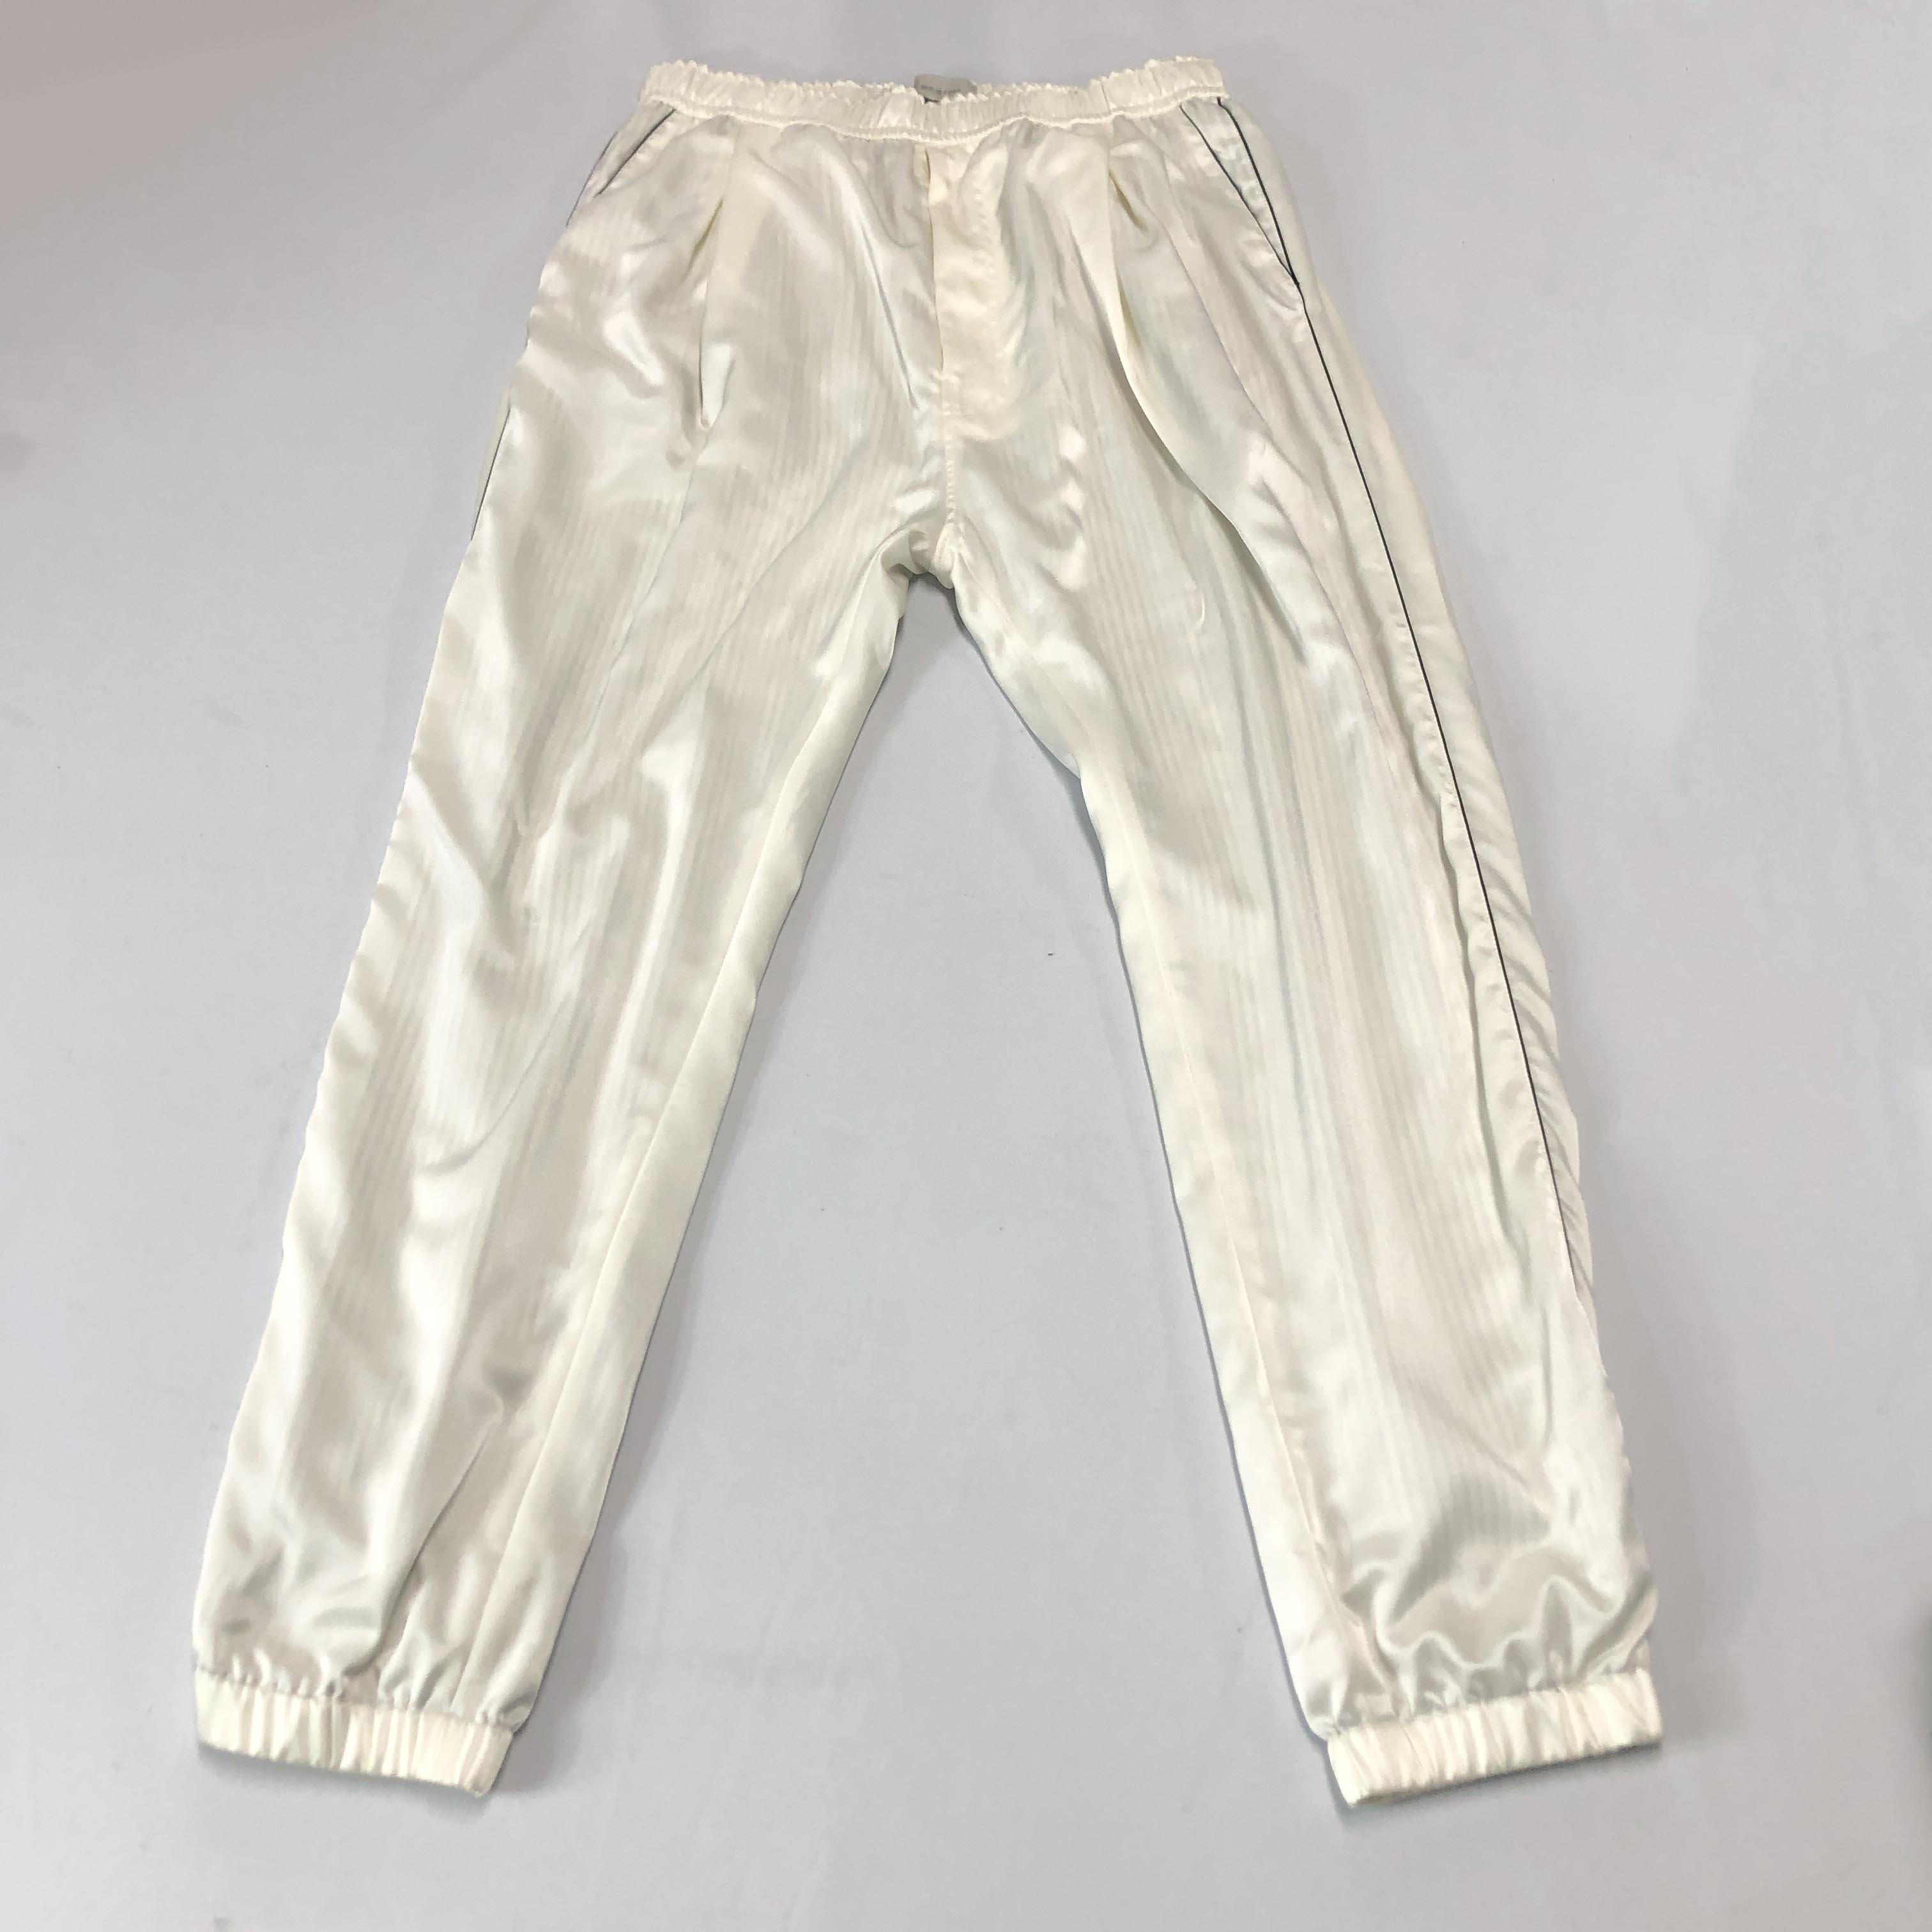 [Bedford] White Trackpants - Size 2